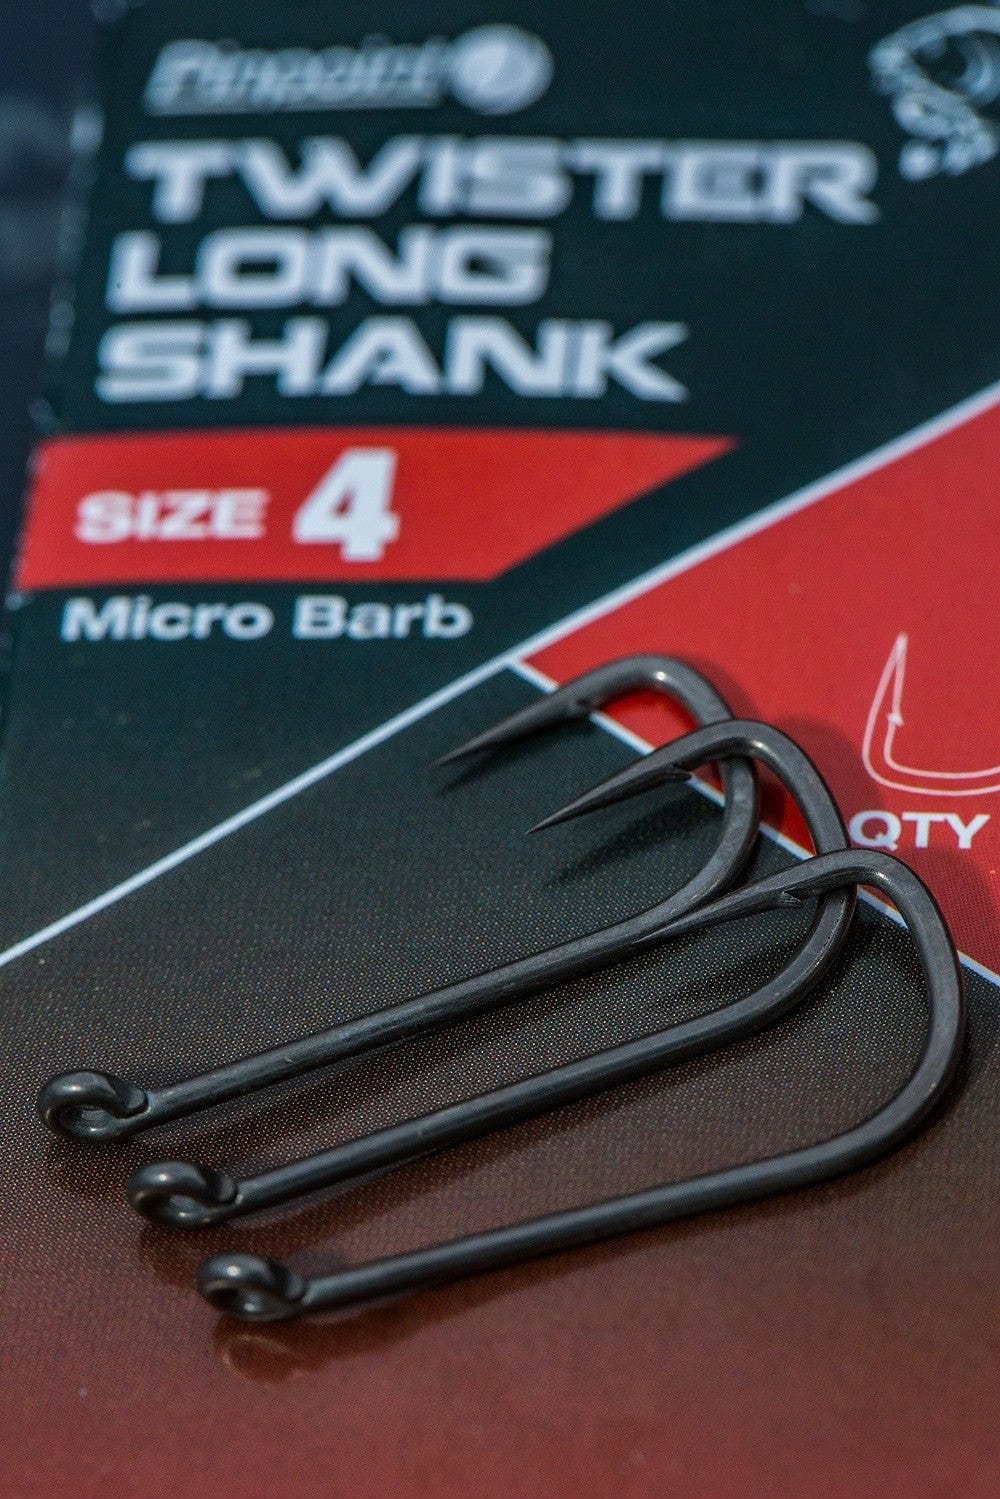 Twister Long Shank Micro Barbed 8